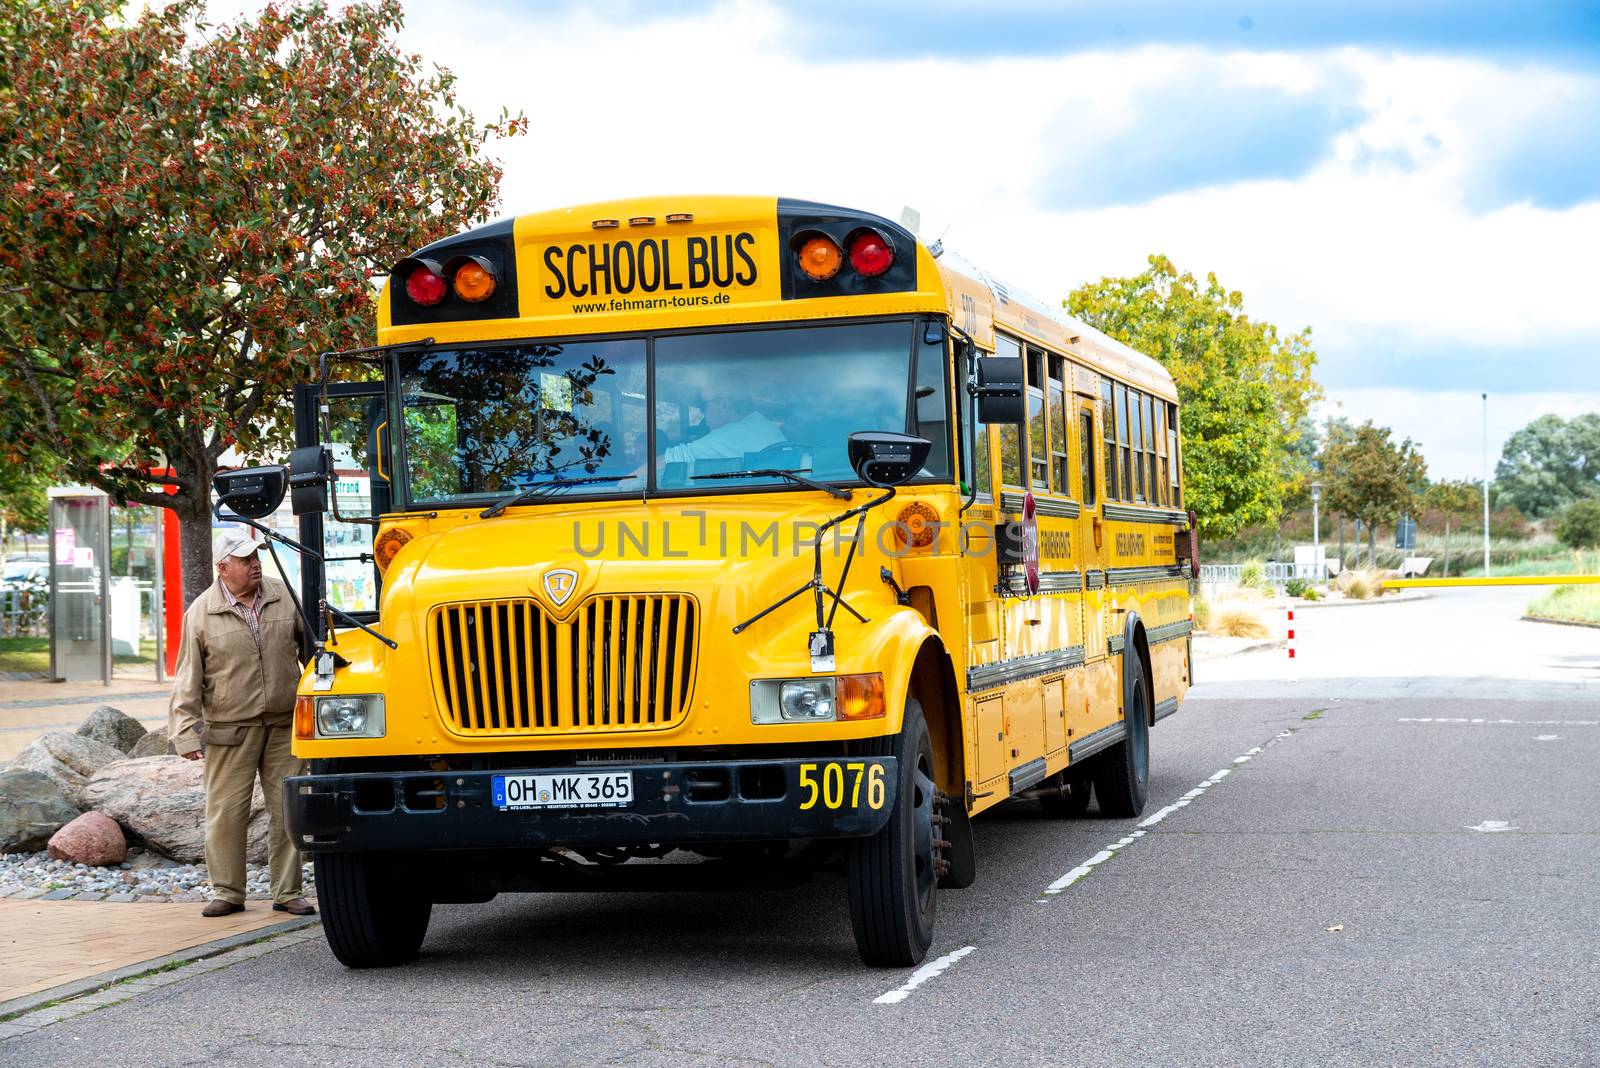 Fehmarn, Schleswig-Holstein/Germany - 05.09.2019: A yellow American school bus from excursion bus on the island of Fehmarn in Germany. At the side is the bus driver.